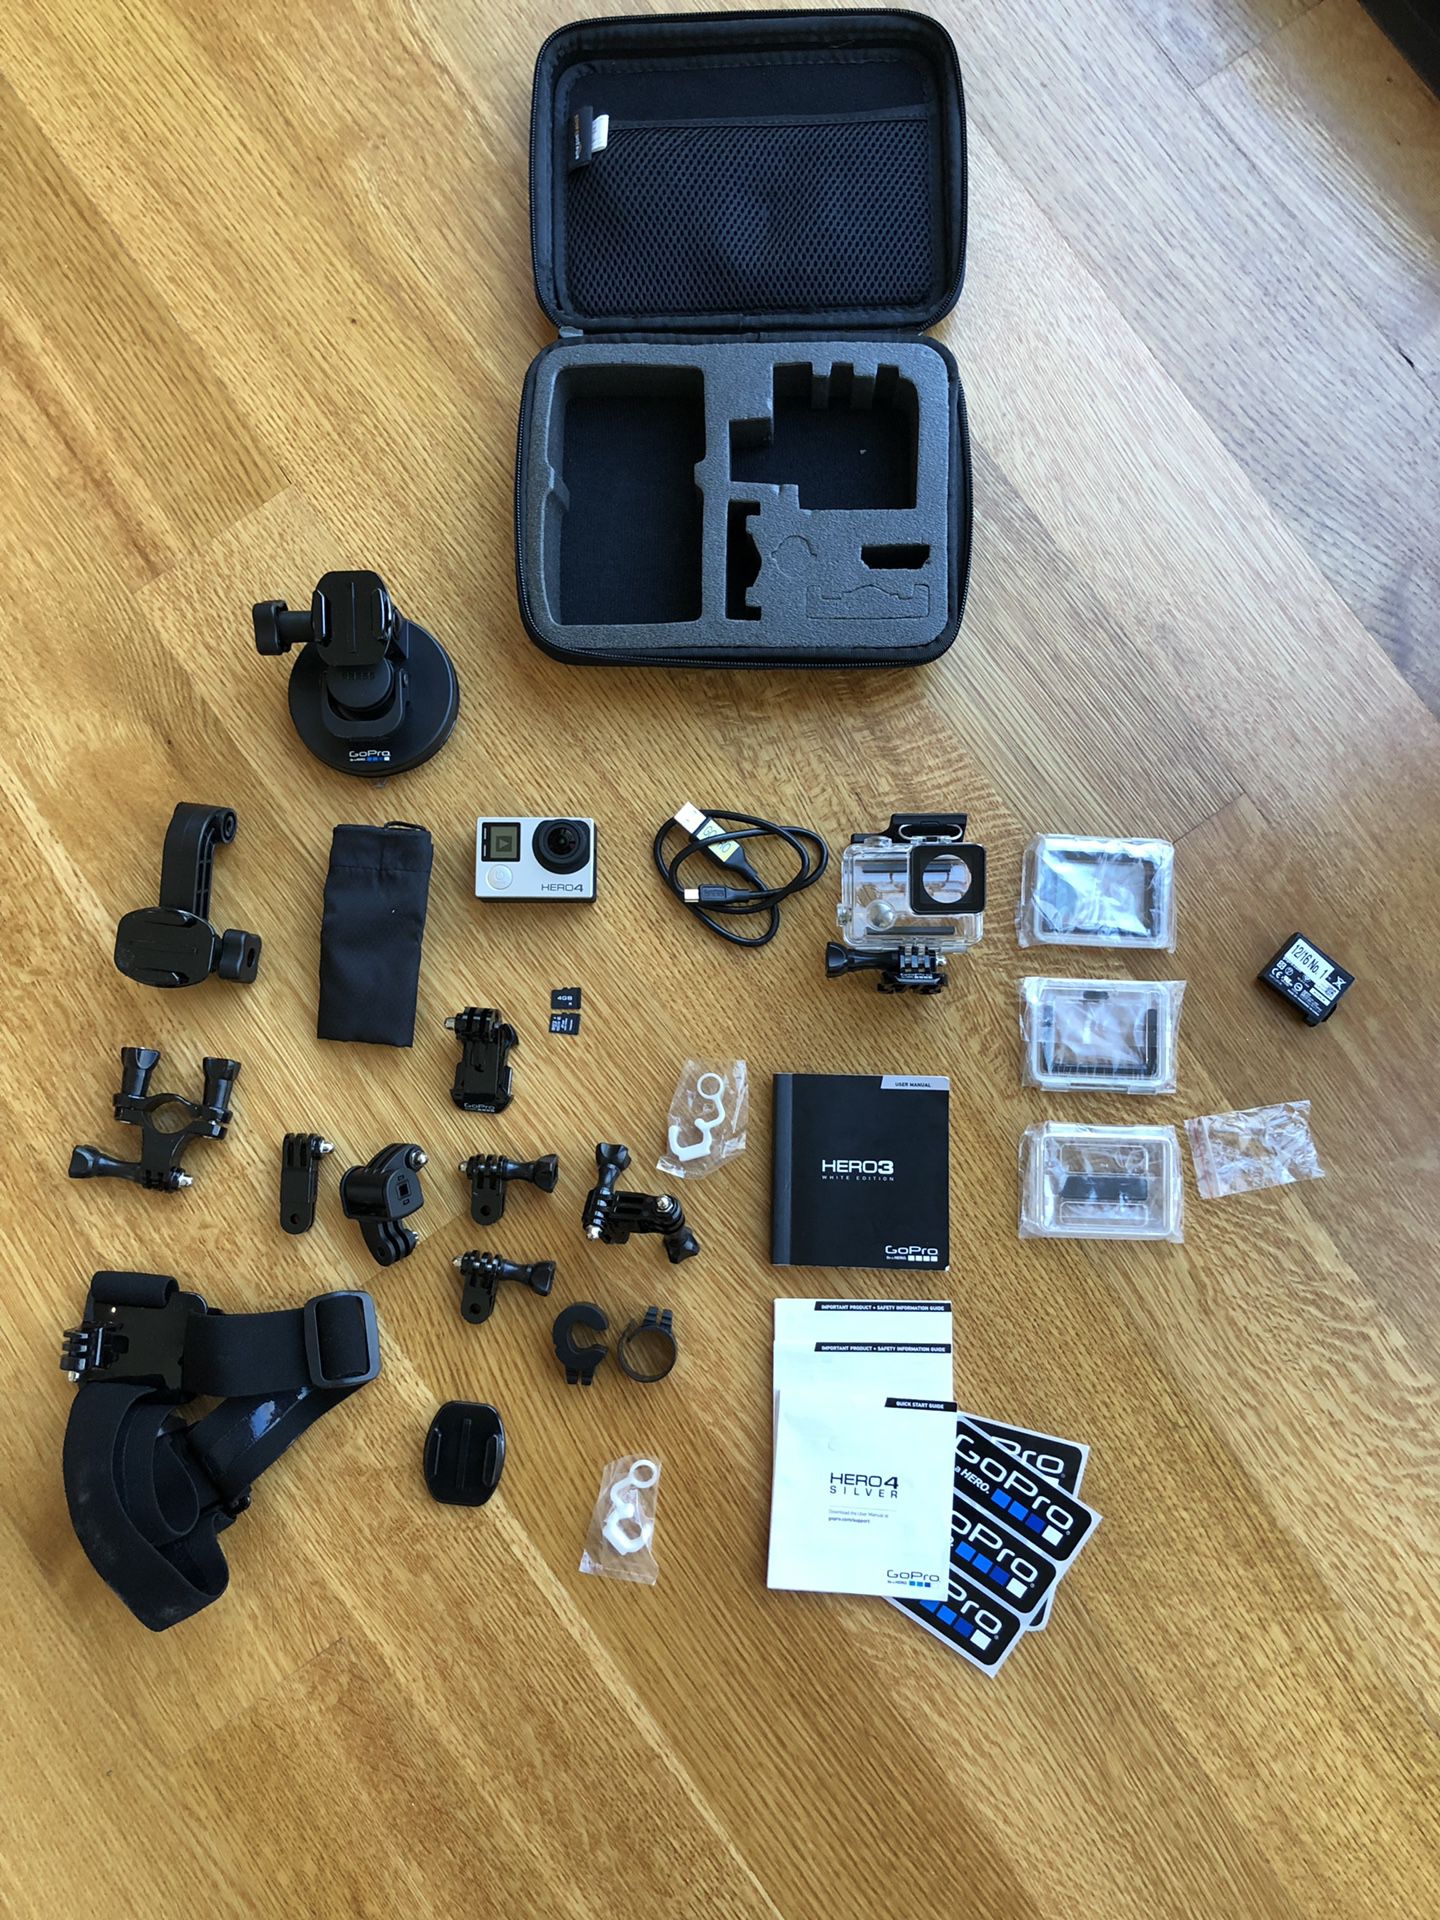 GoPro HERO 4 Silver Bundle With 4 & 8 gb SD, Dual Bat/charger, Padded Case. Two batteries and also a separate charger.